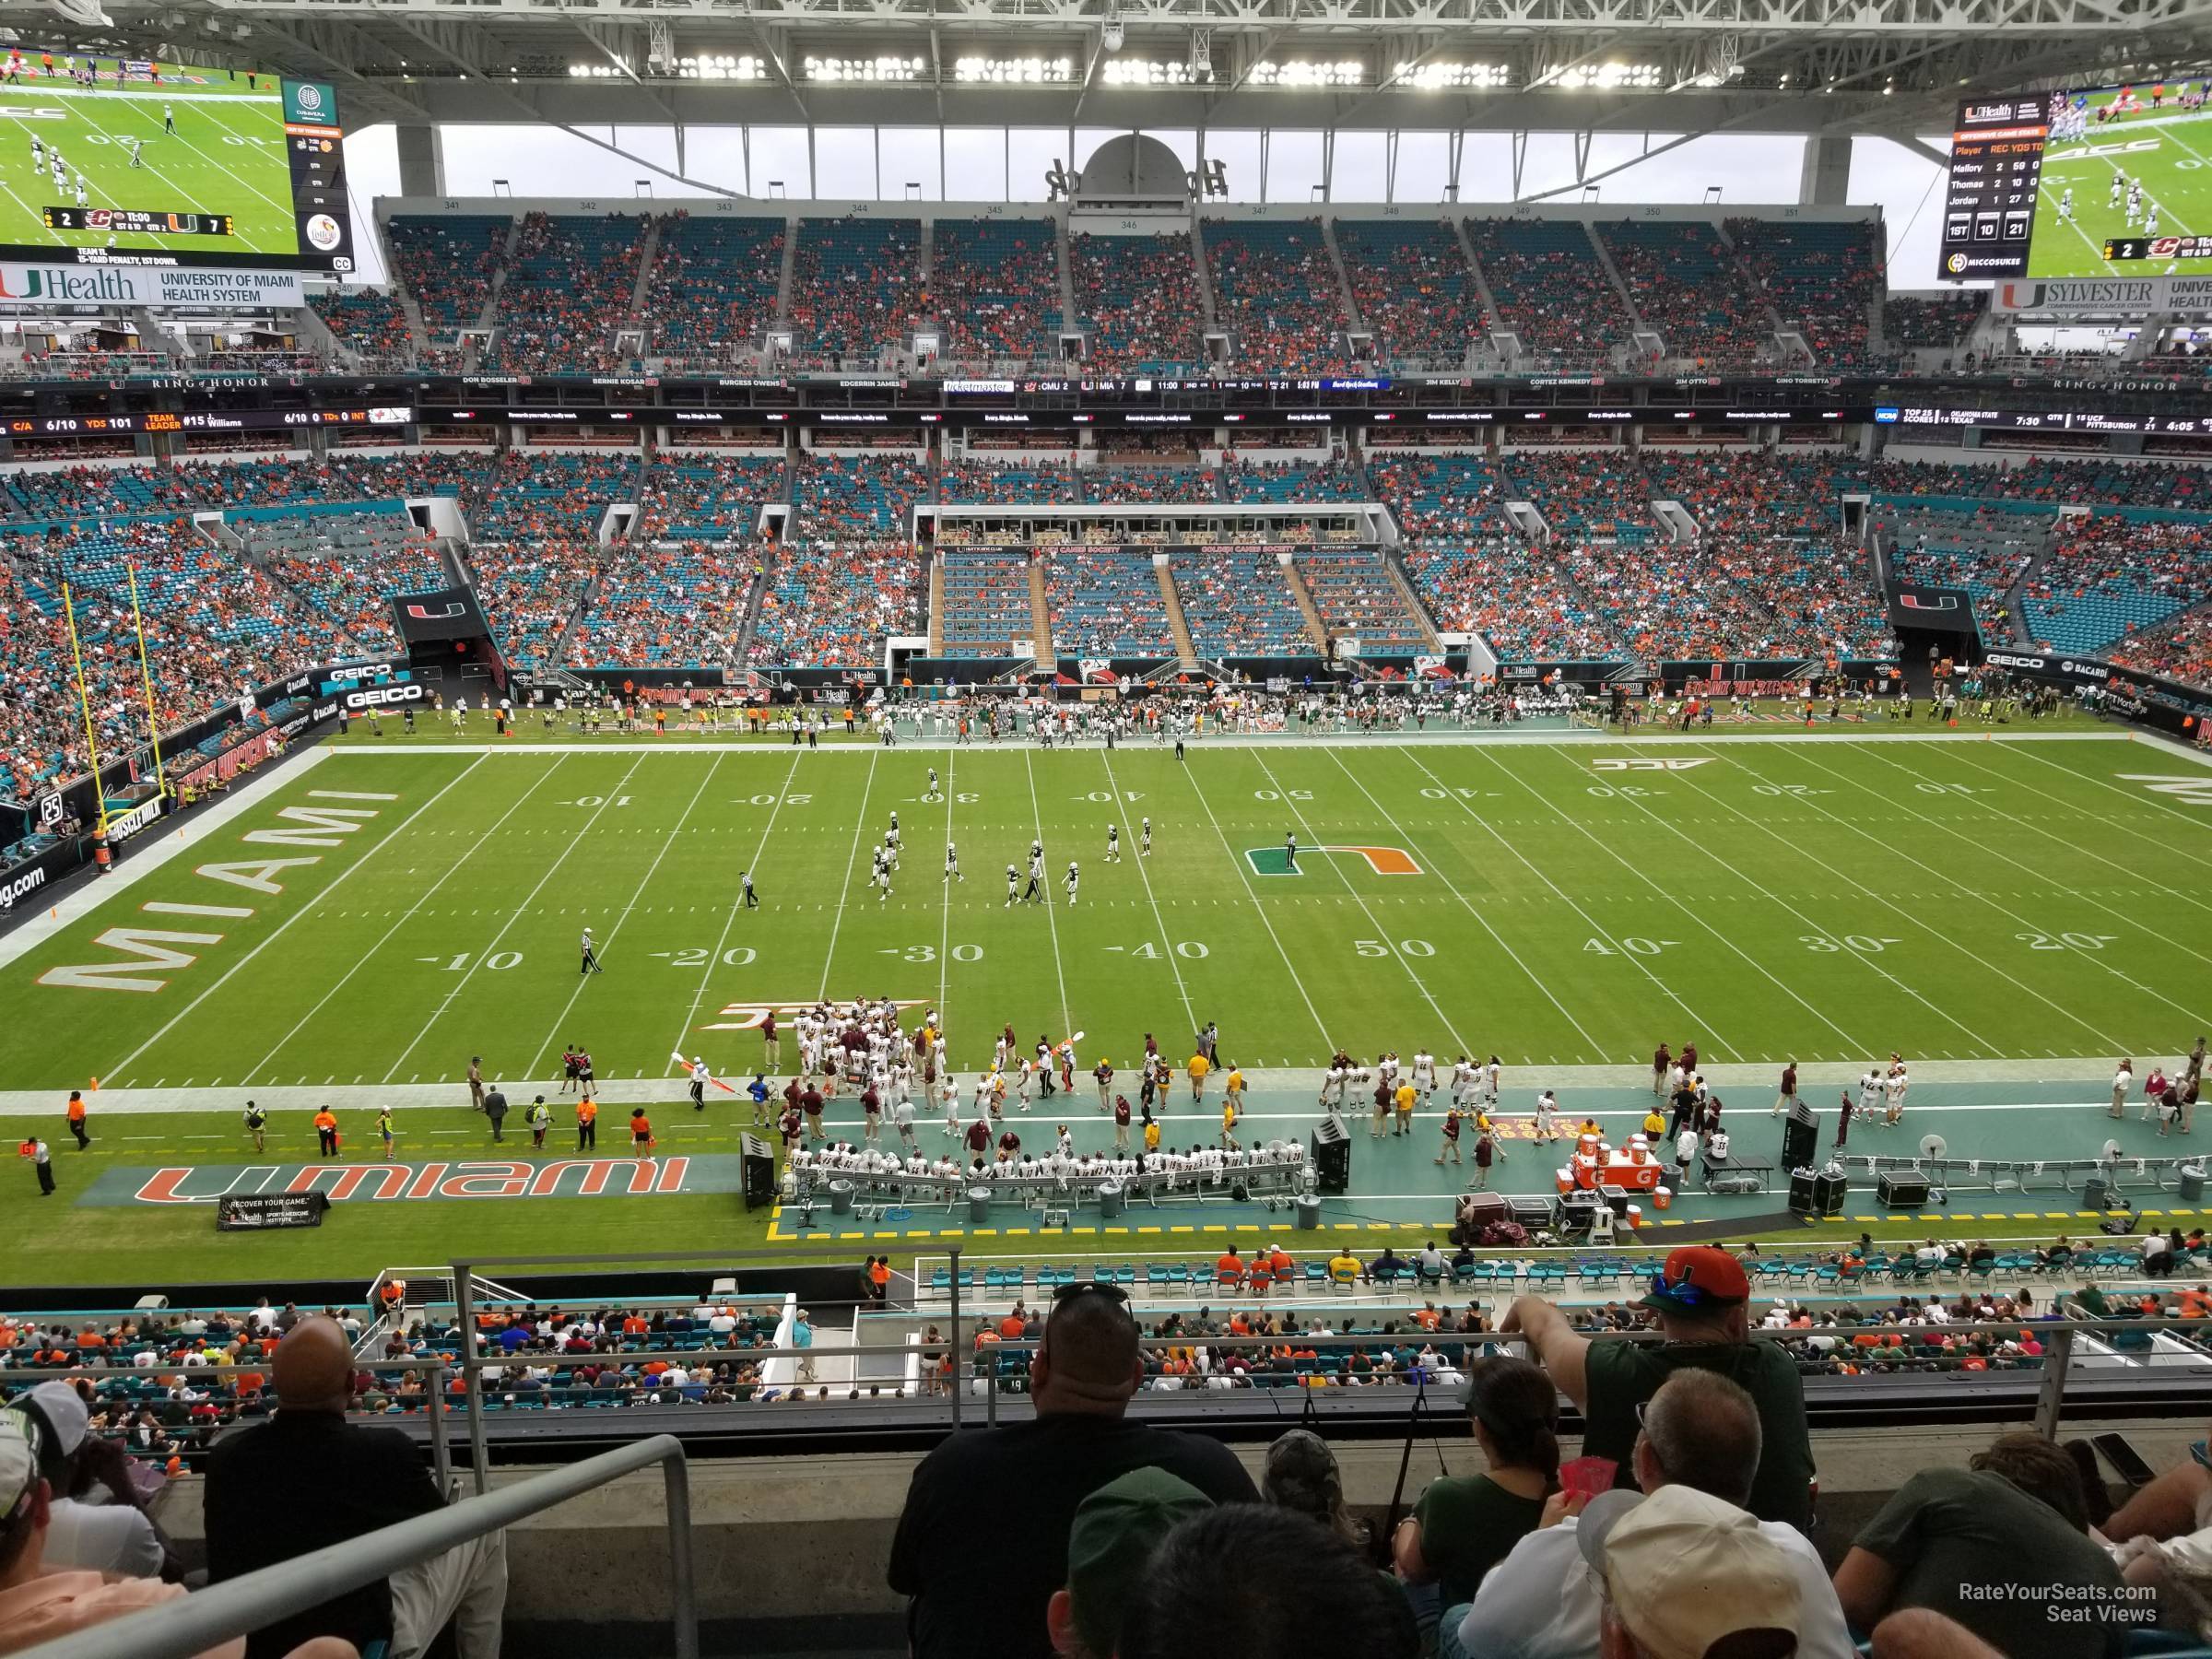 section 319, row 5 seat view  for football - hard rock stadium